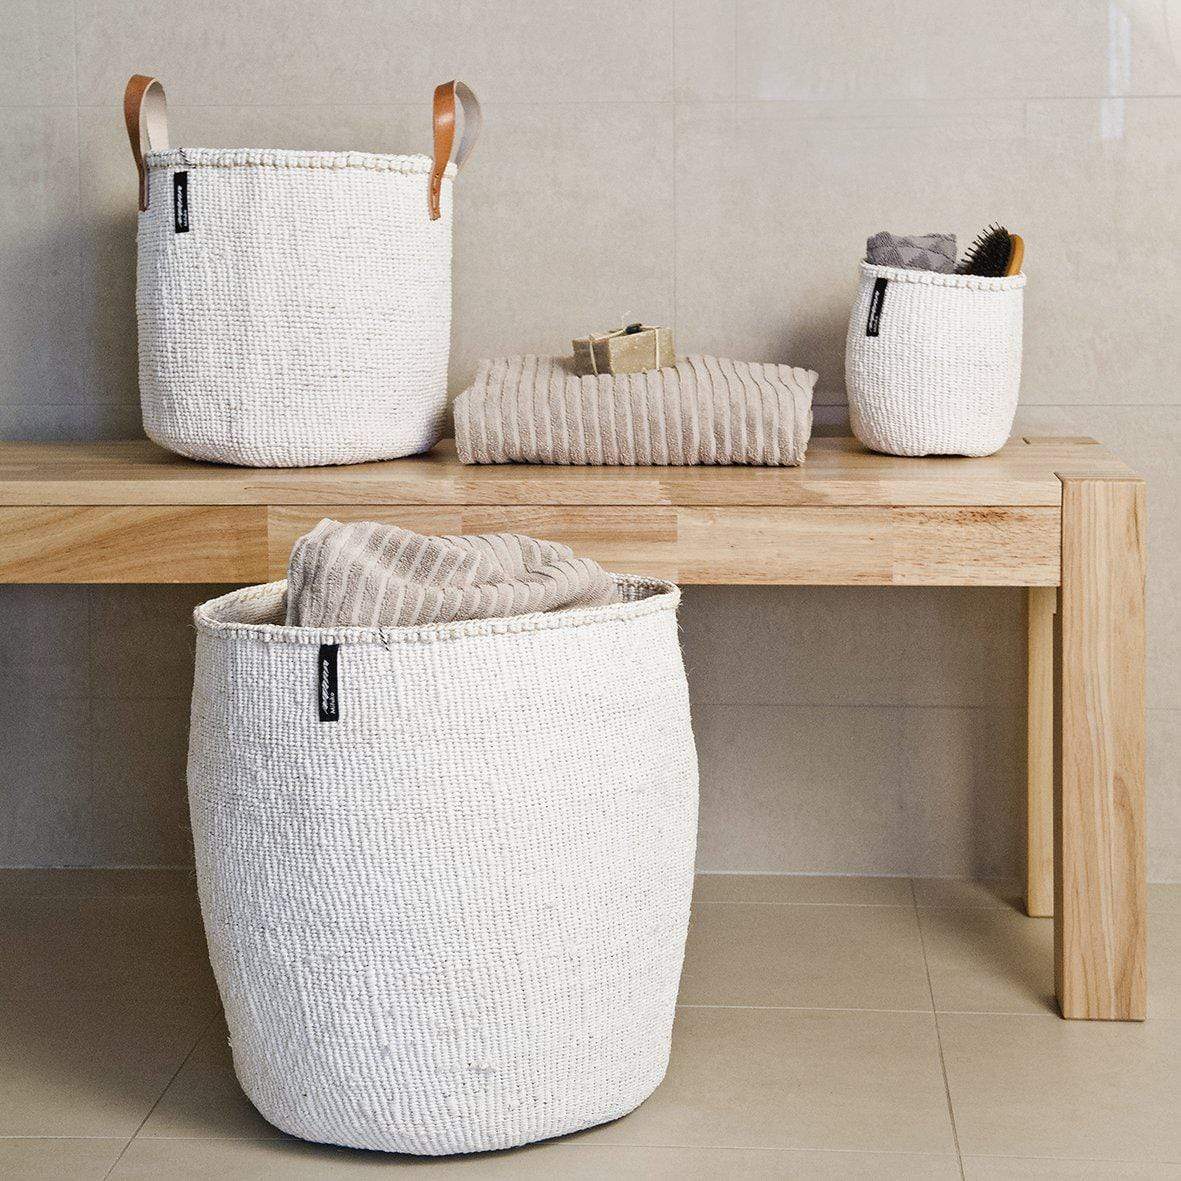 Handmade fair trade Partly recycled plastic and sisal Kiondo basket | White L